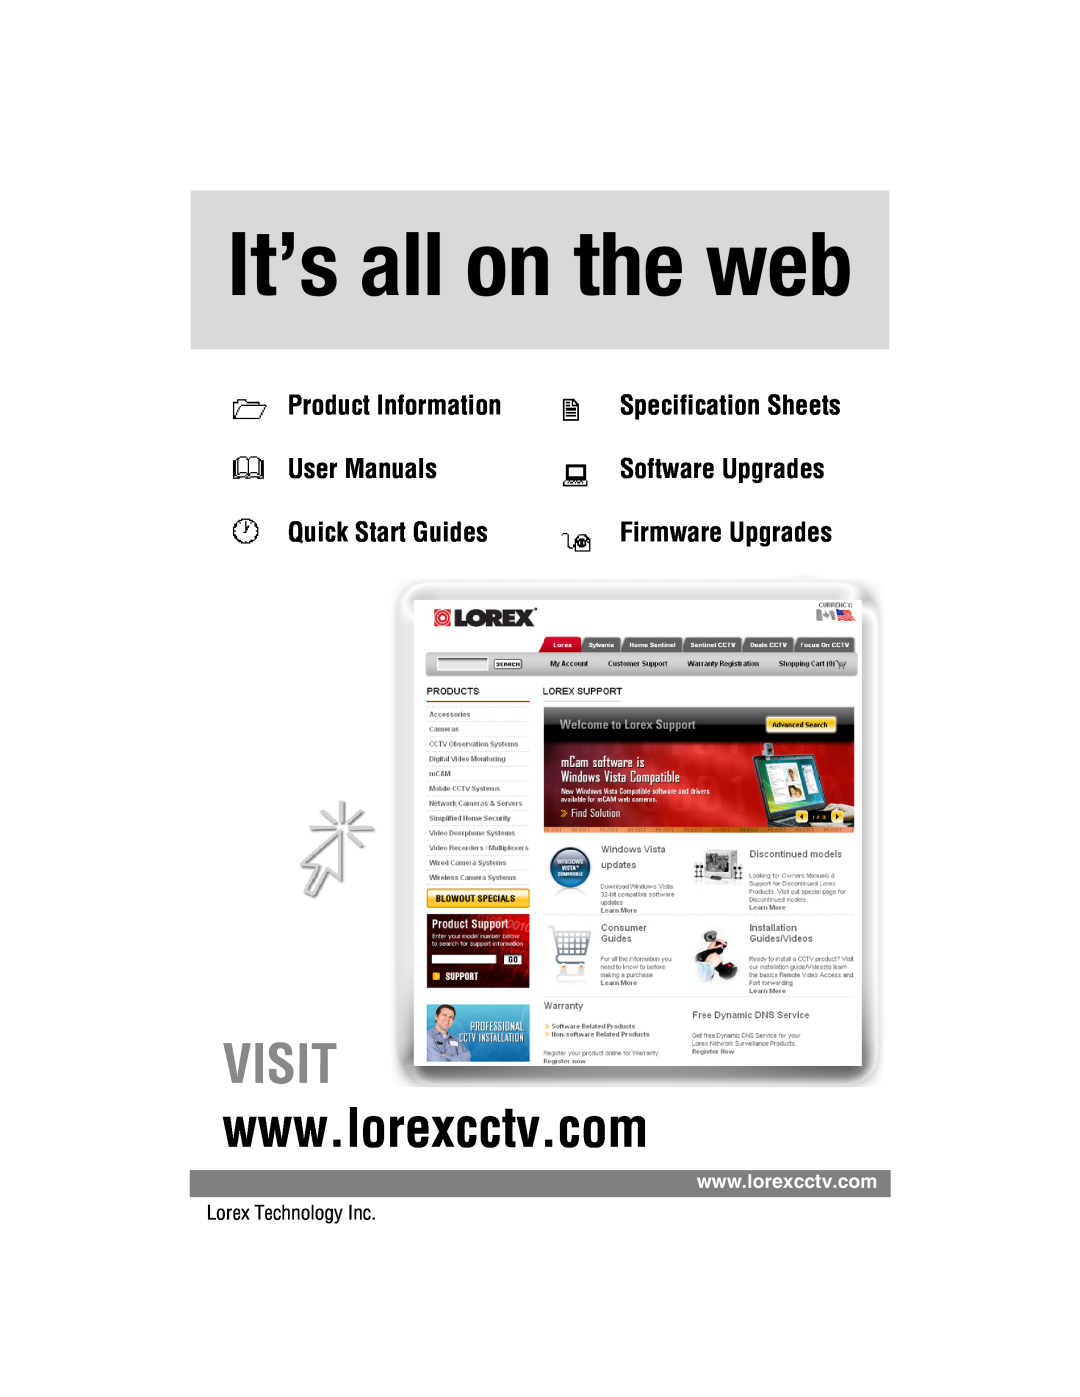 LOREX Technology L19lD1616501 Software Upgrades, It’s all on the web, Visit, Product Information, Quick Start Guides 